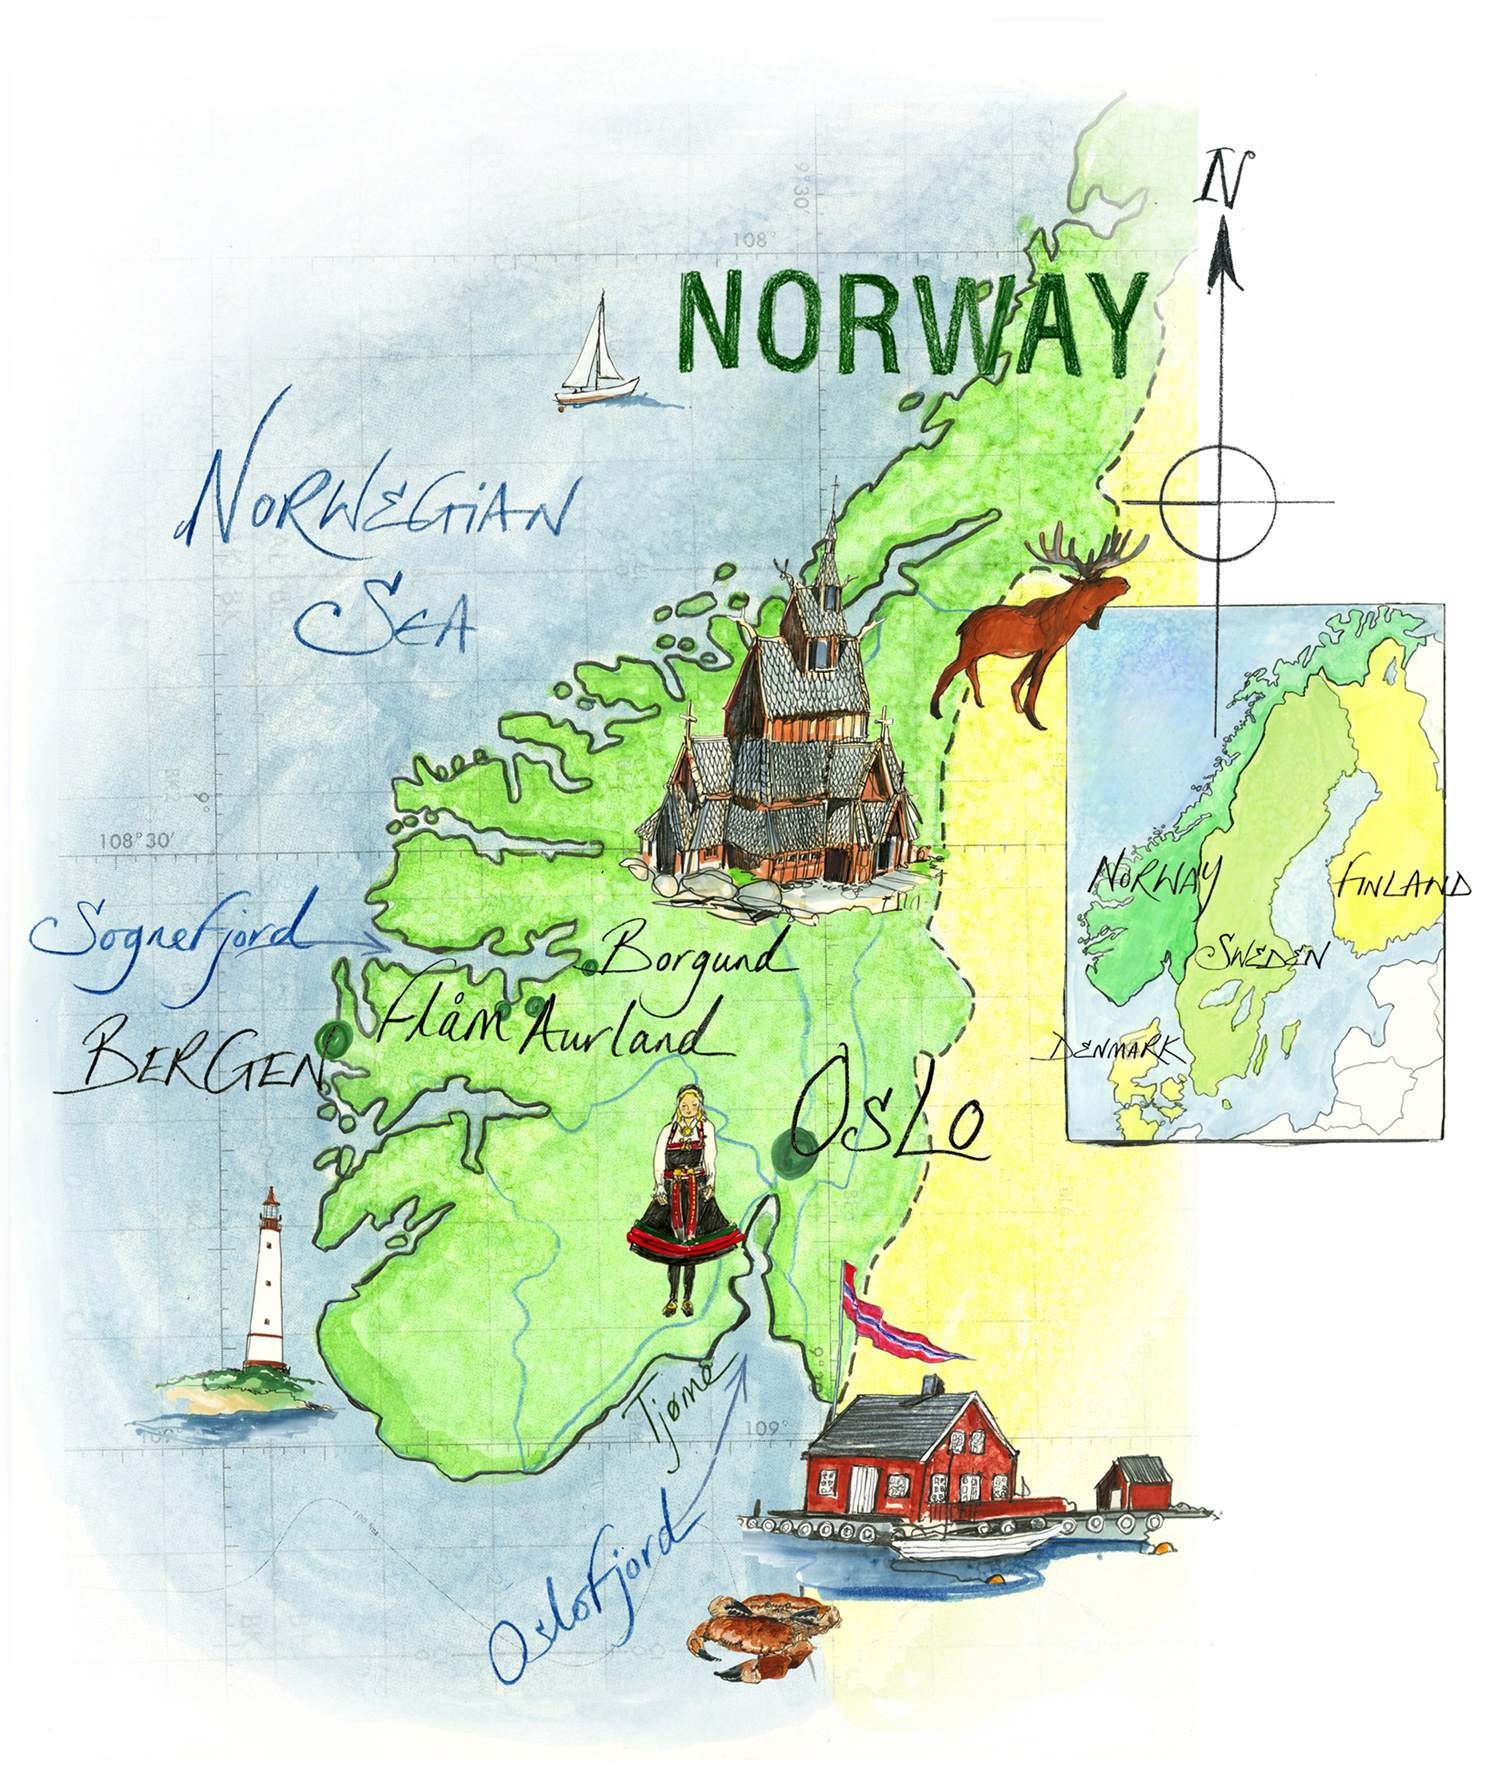 Norway Map / The Times Travel